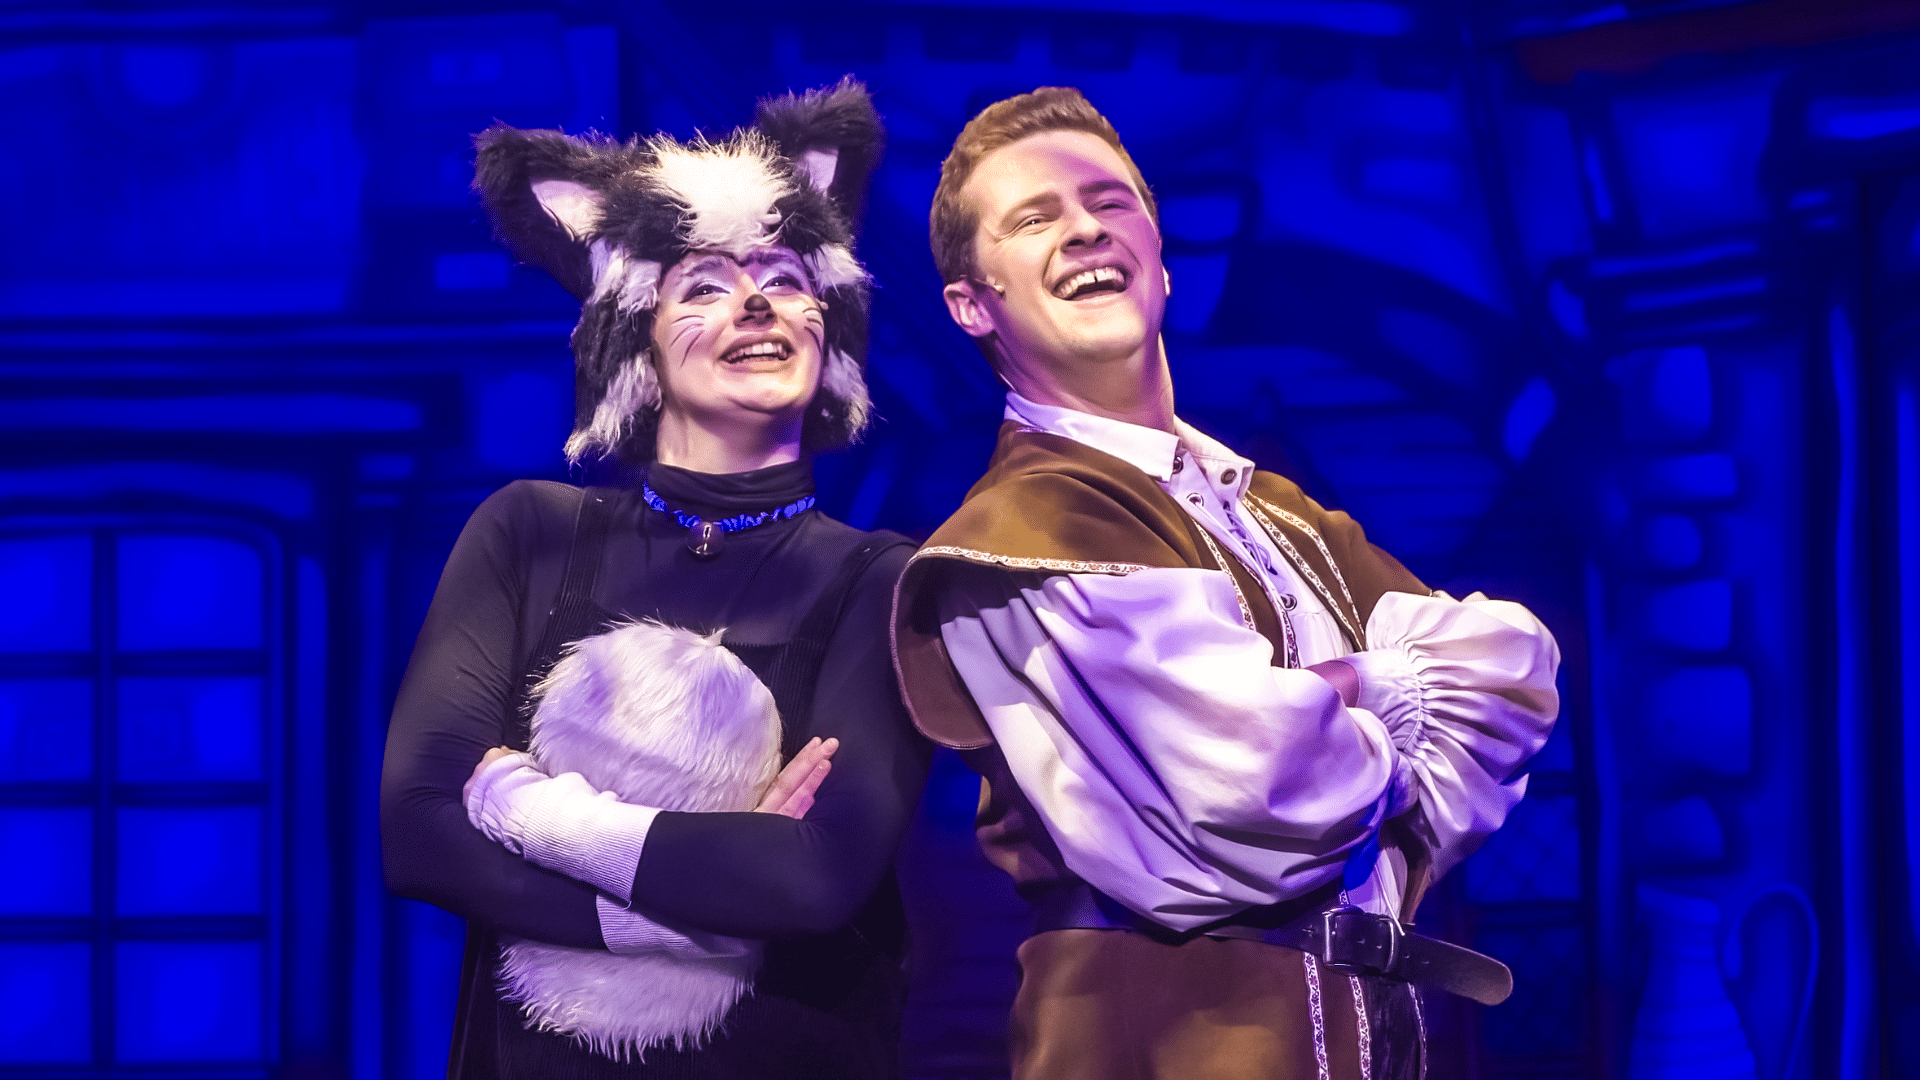 Dick Whittington Production Photo: Dick Whittington (Elliot Coombe) wears a loose white shirt and brown waistcoat; he stands back-to-back with Sox (Poppy Joy), a young woman dressed as a black-and-white cat; they are both crossing their arms.